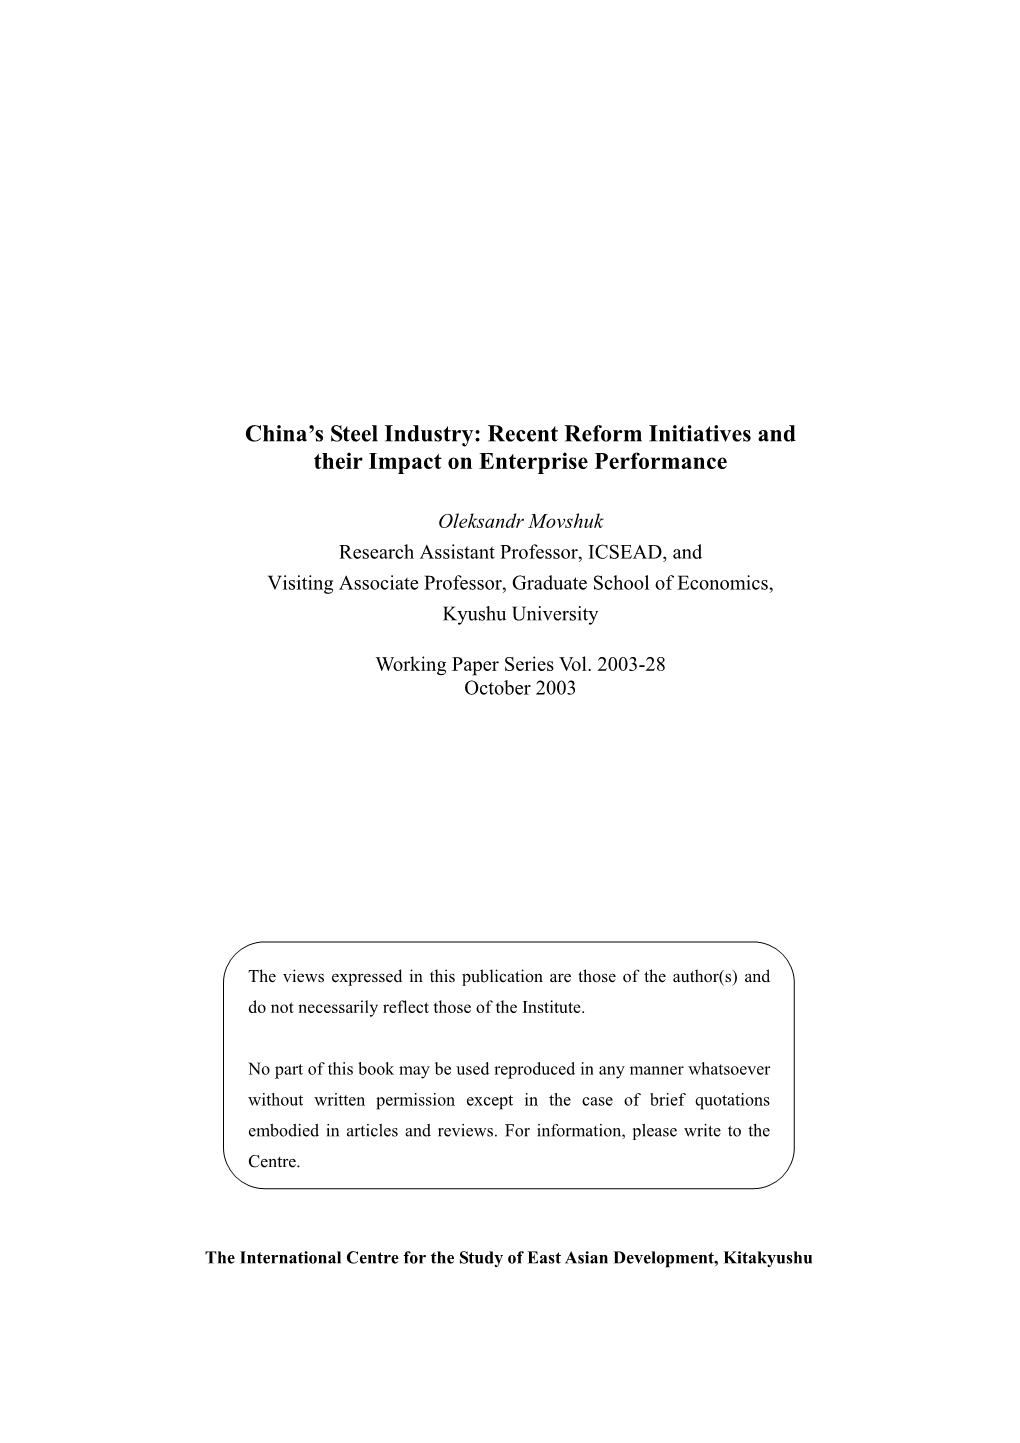 China's Steel Industry: Recent Reform Initiatives and Their Impact On